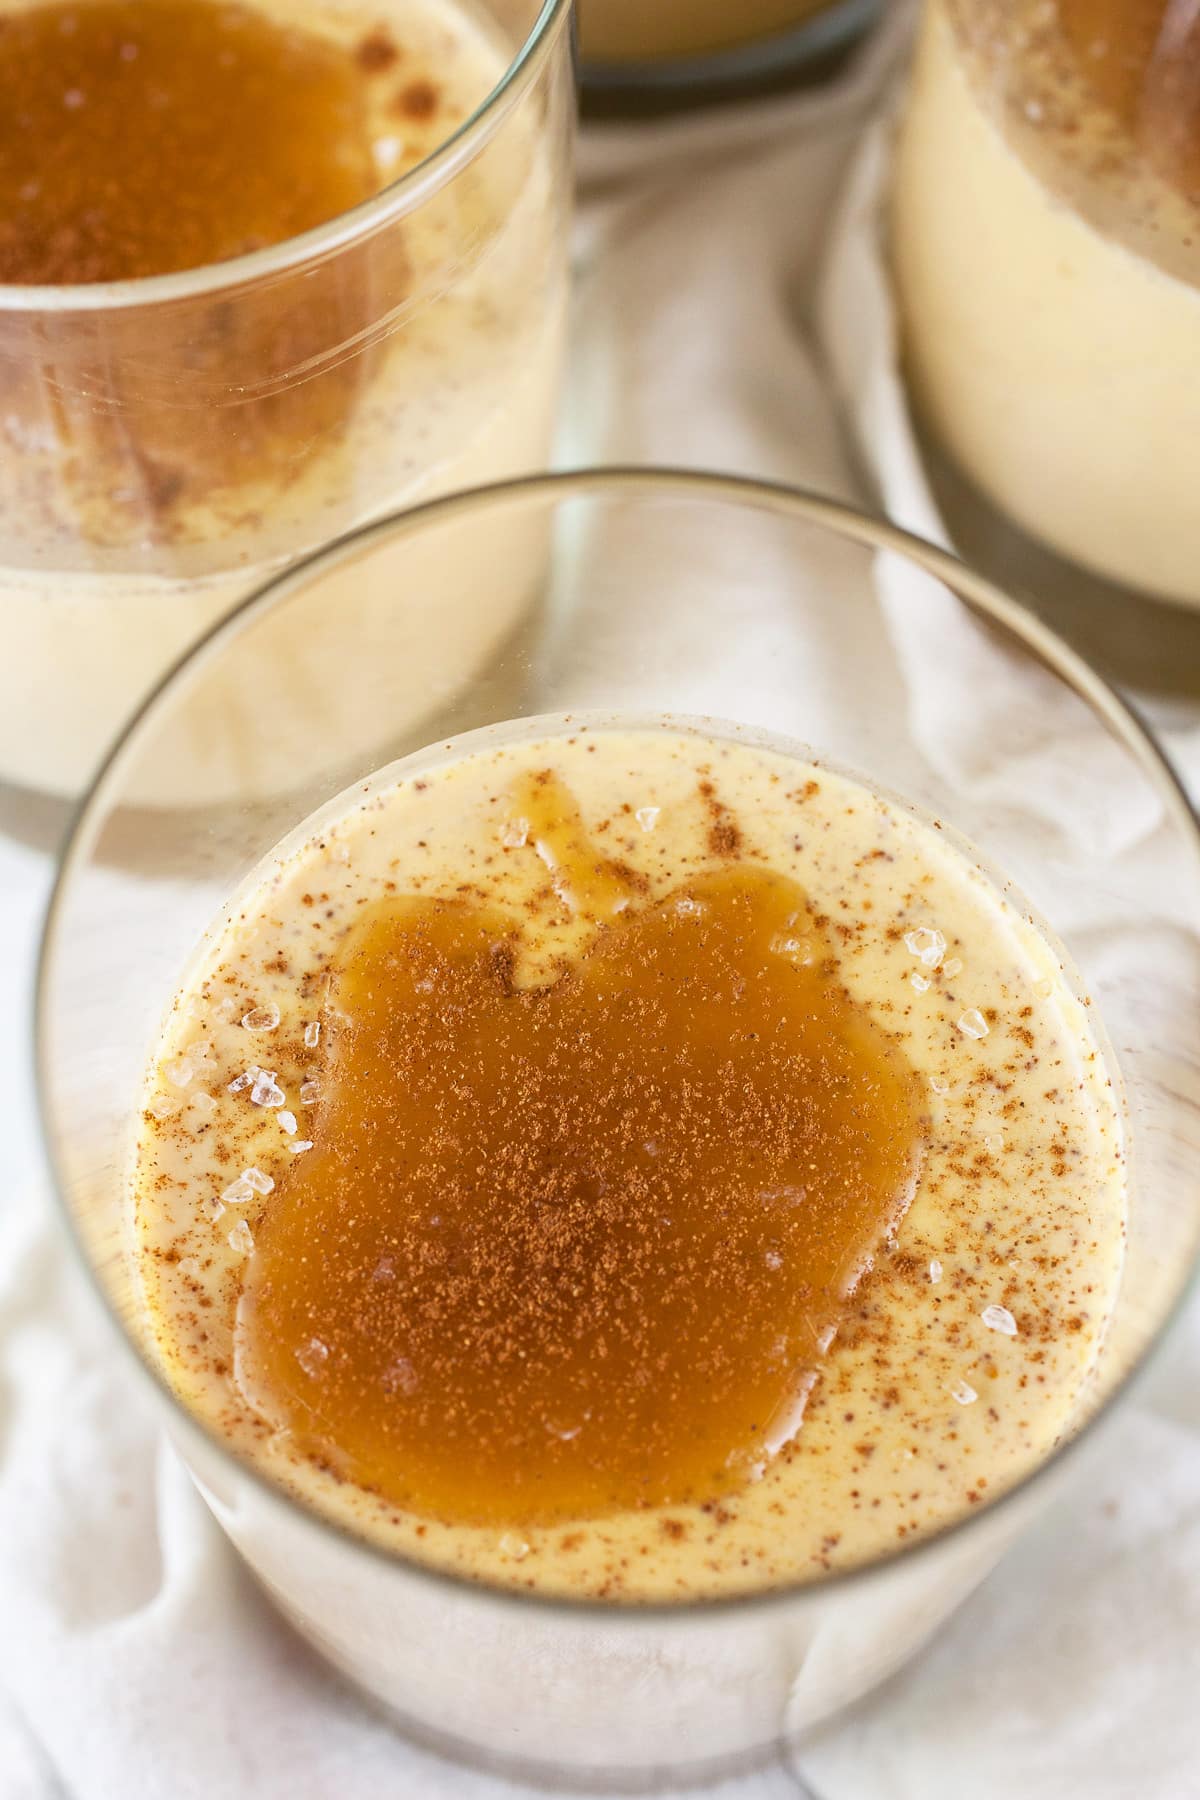 Pumpkin panna cotta with caramel sauce in small glasses.